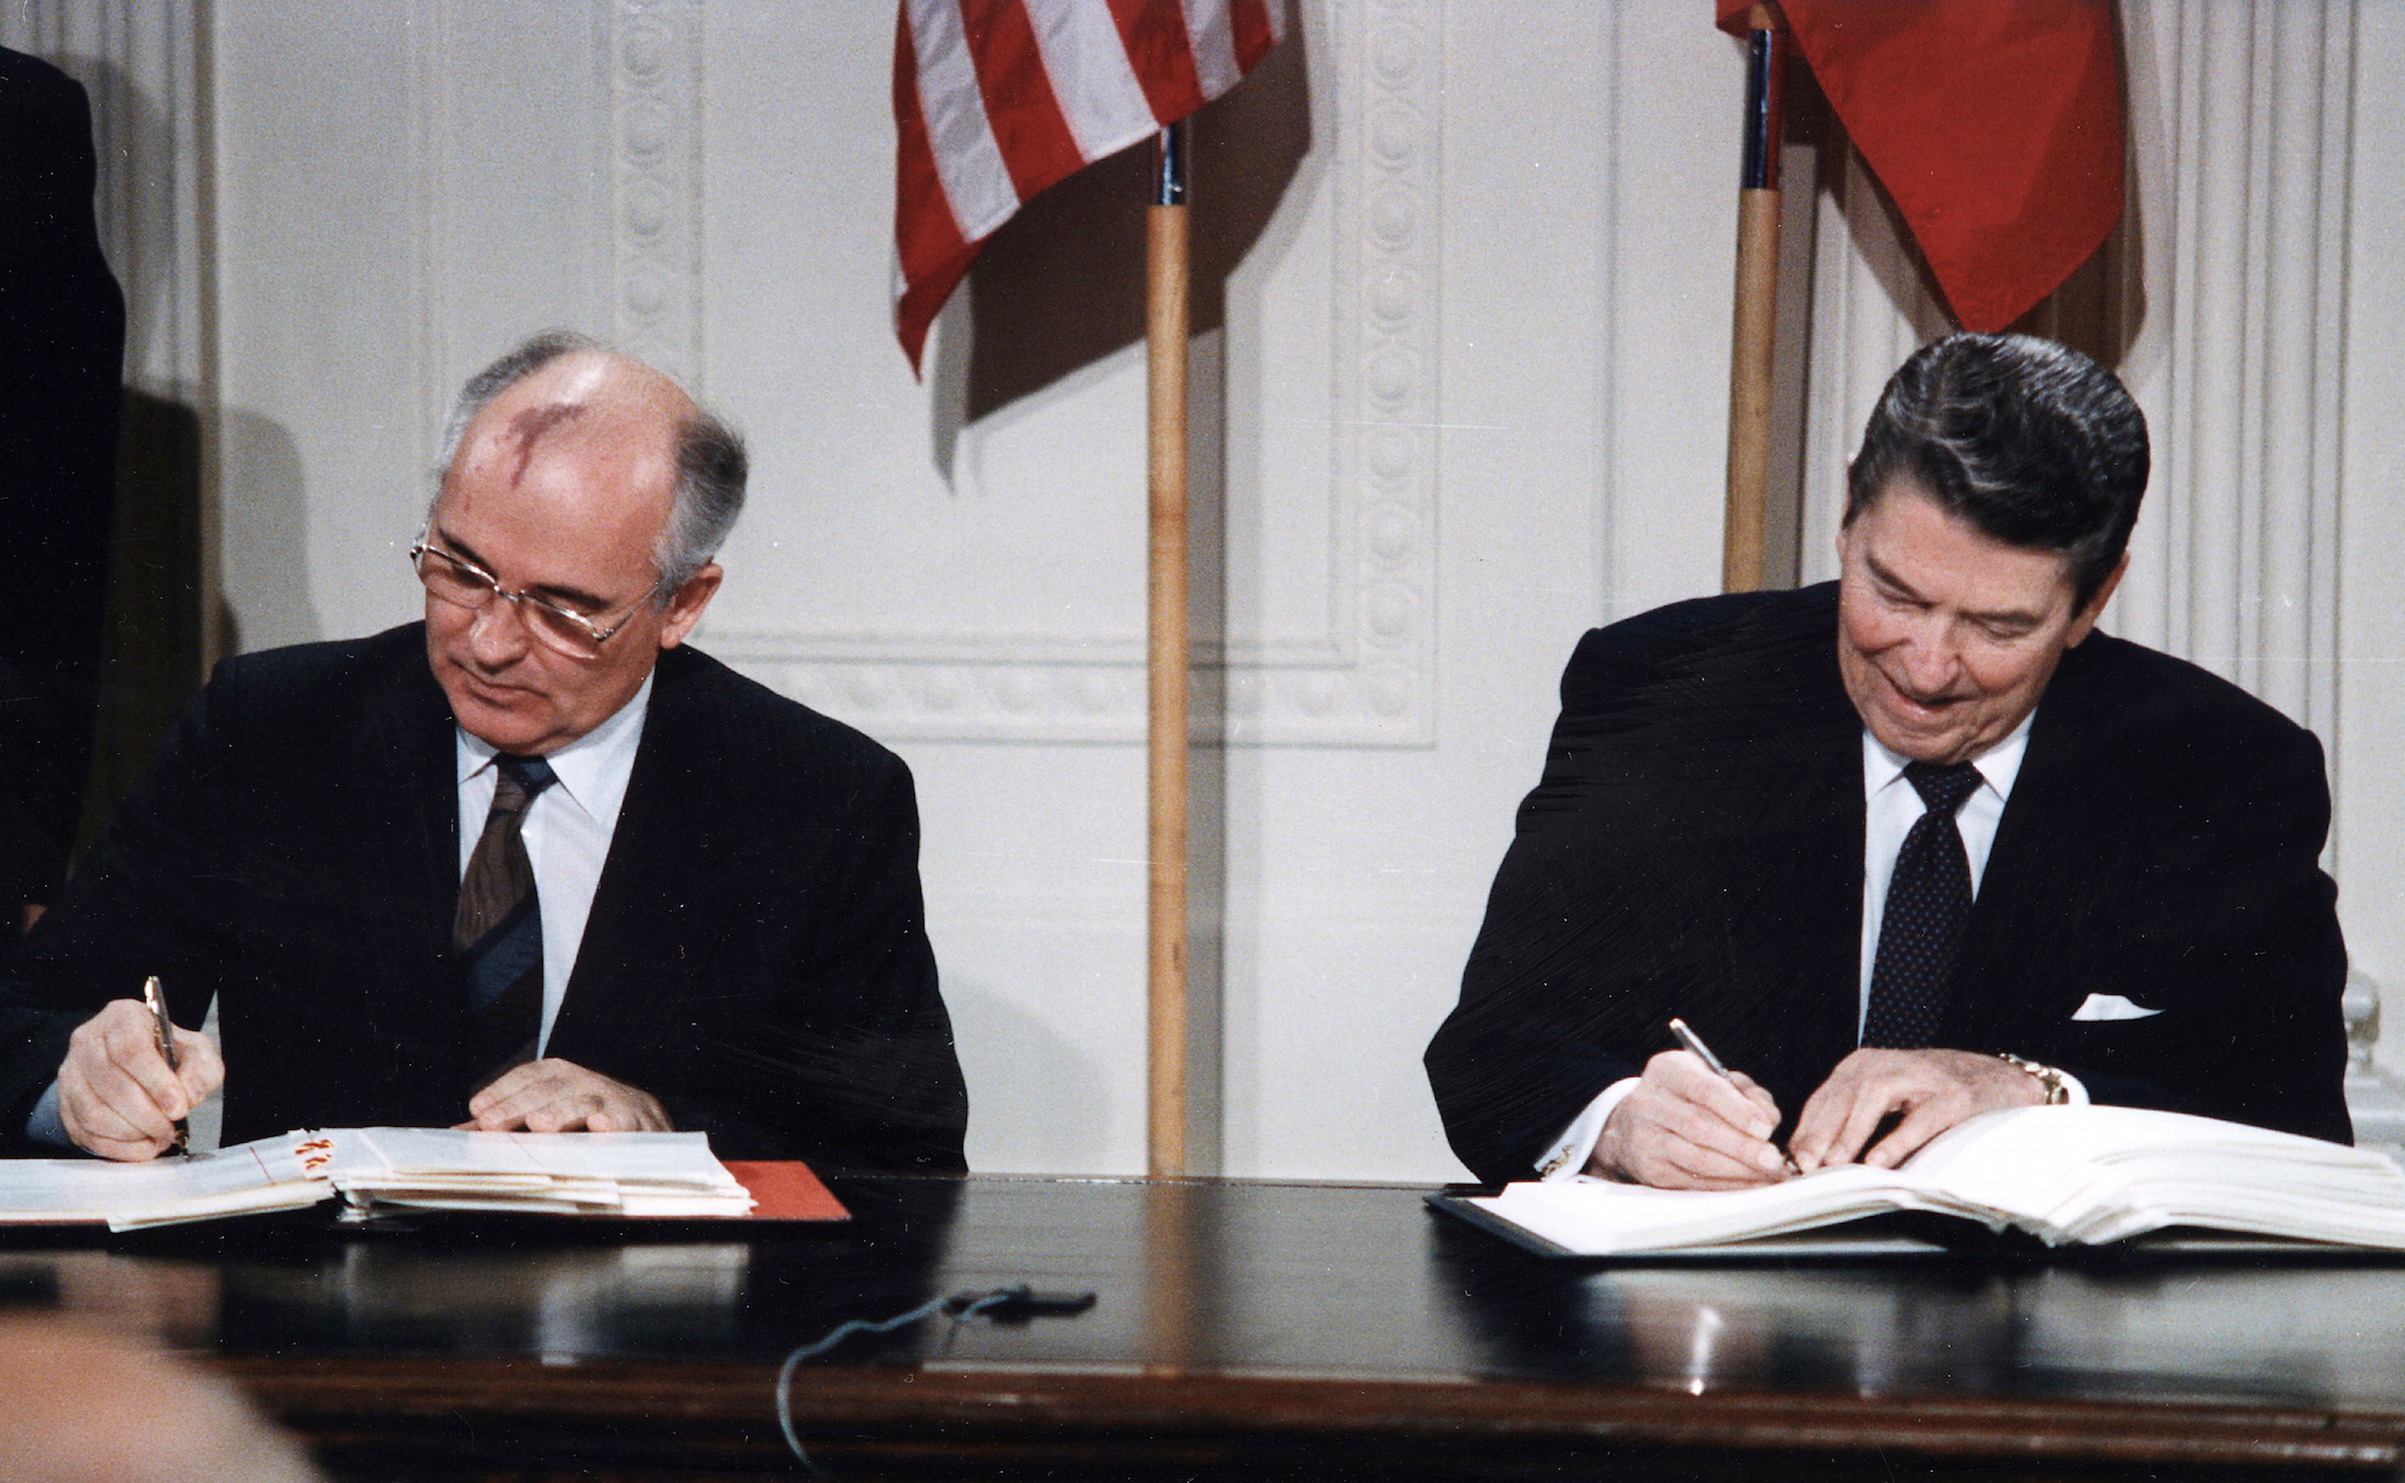 U.S. President Ronald Reagan and Soviet General Secretary Mikhail Gorbachev signing the INF Treaty in the East Room at the White House in 1987. (Universal History Archive/Getty Images)